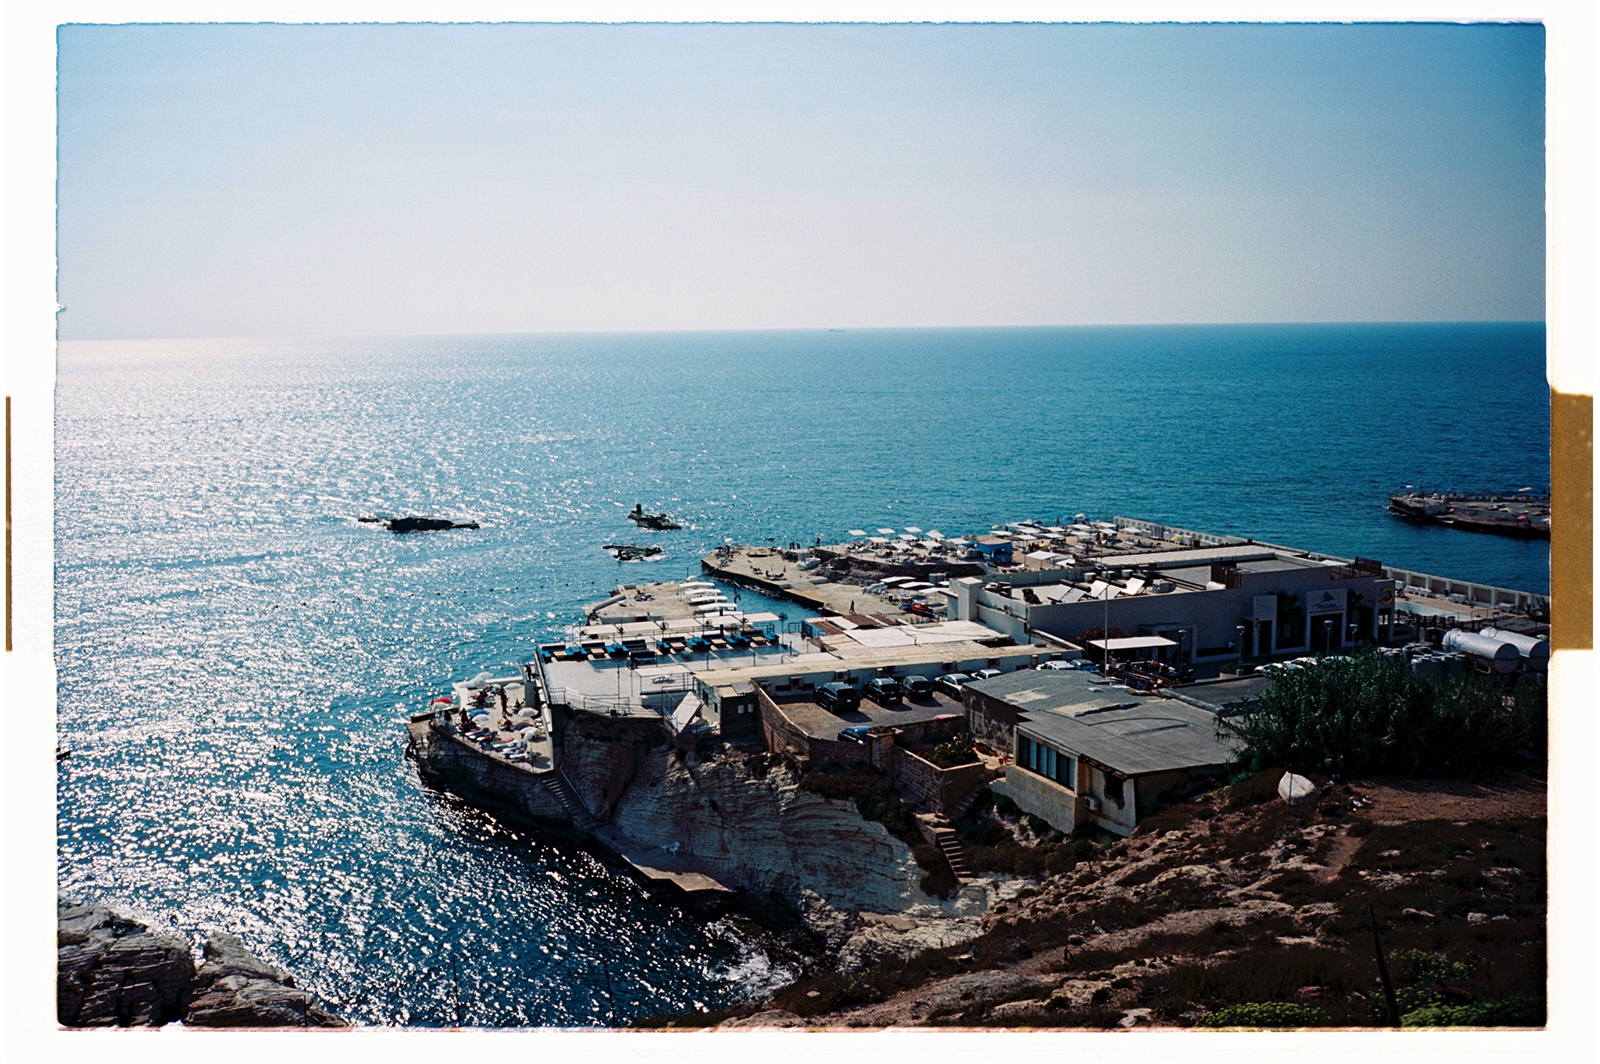 Glimpse ‘old Beirut’ in photographs of the city’s iconic Sporting Club resort